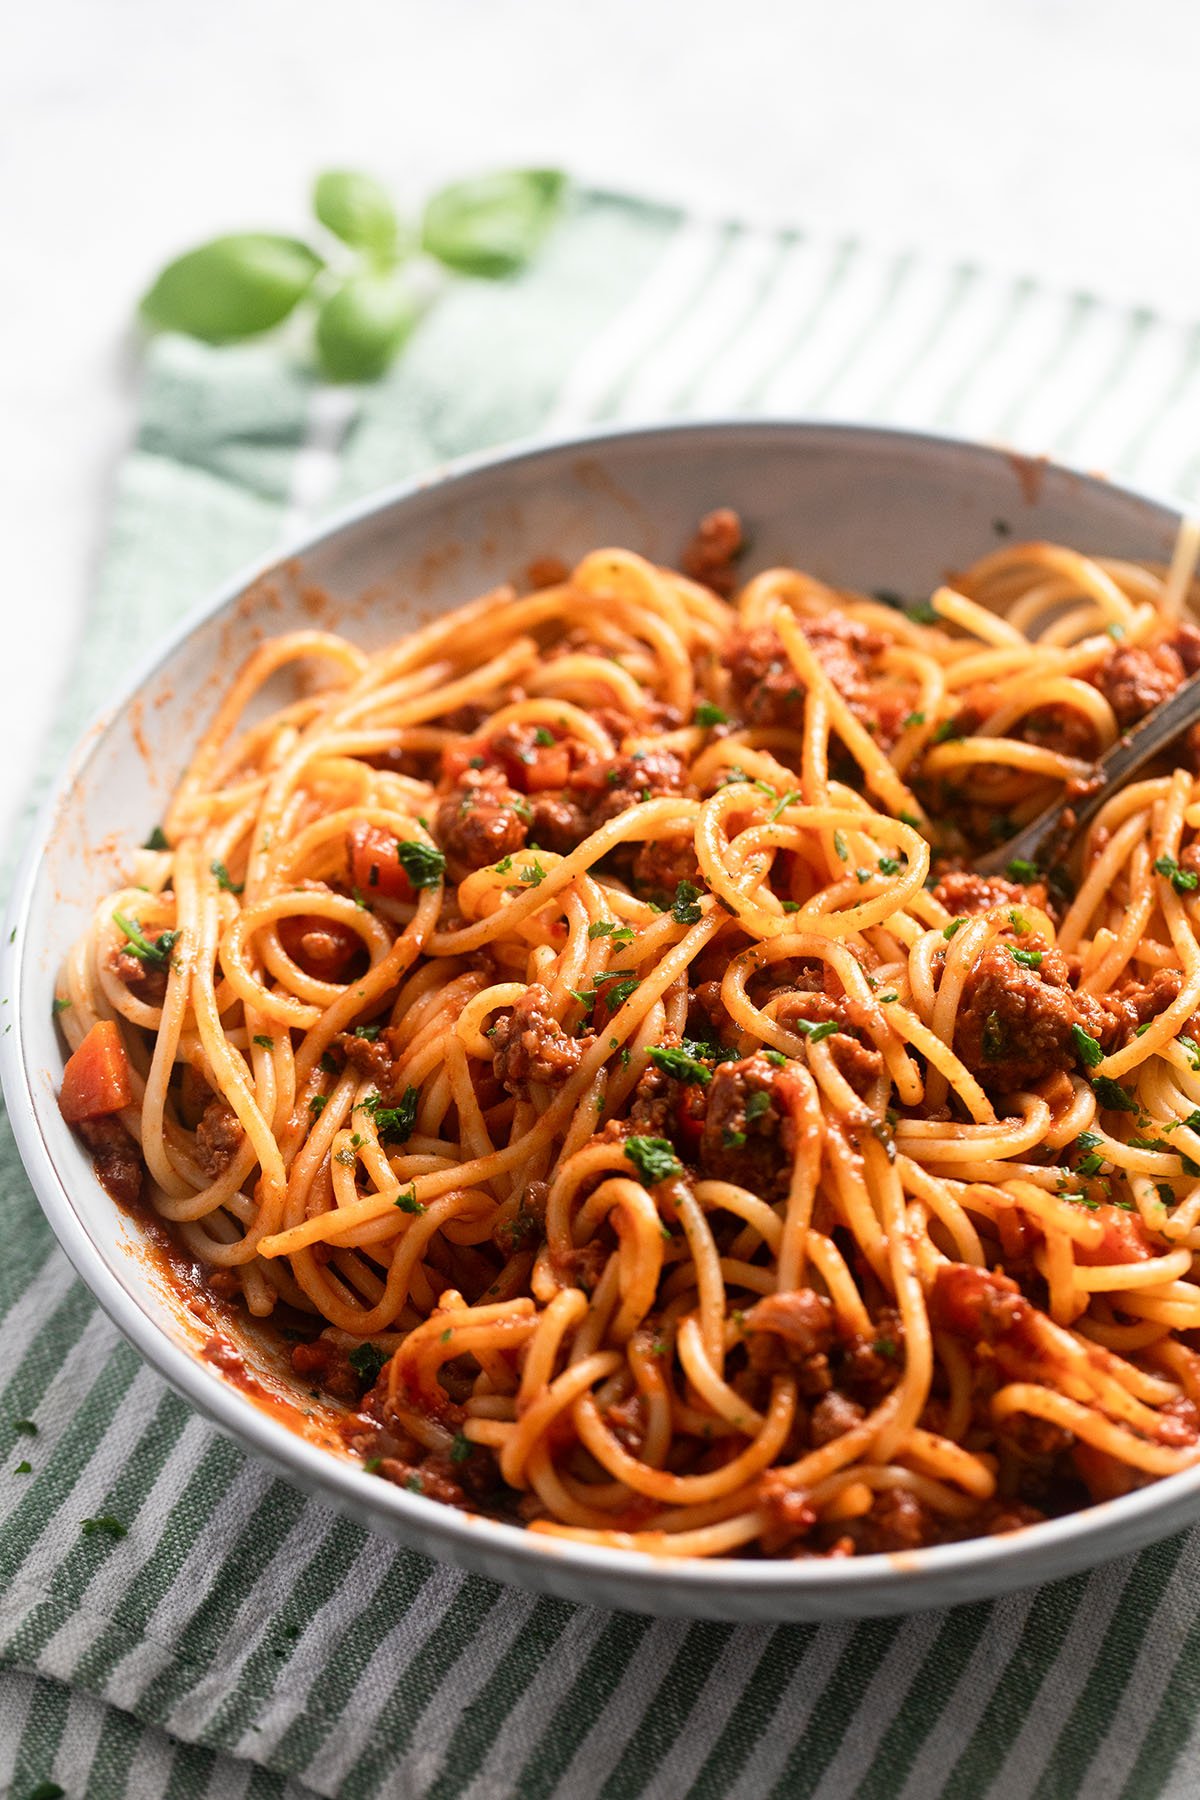 bowl with spaghetti with turkey and tomato sauce on a striped kitched cloth.